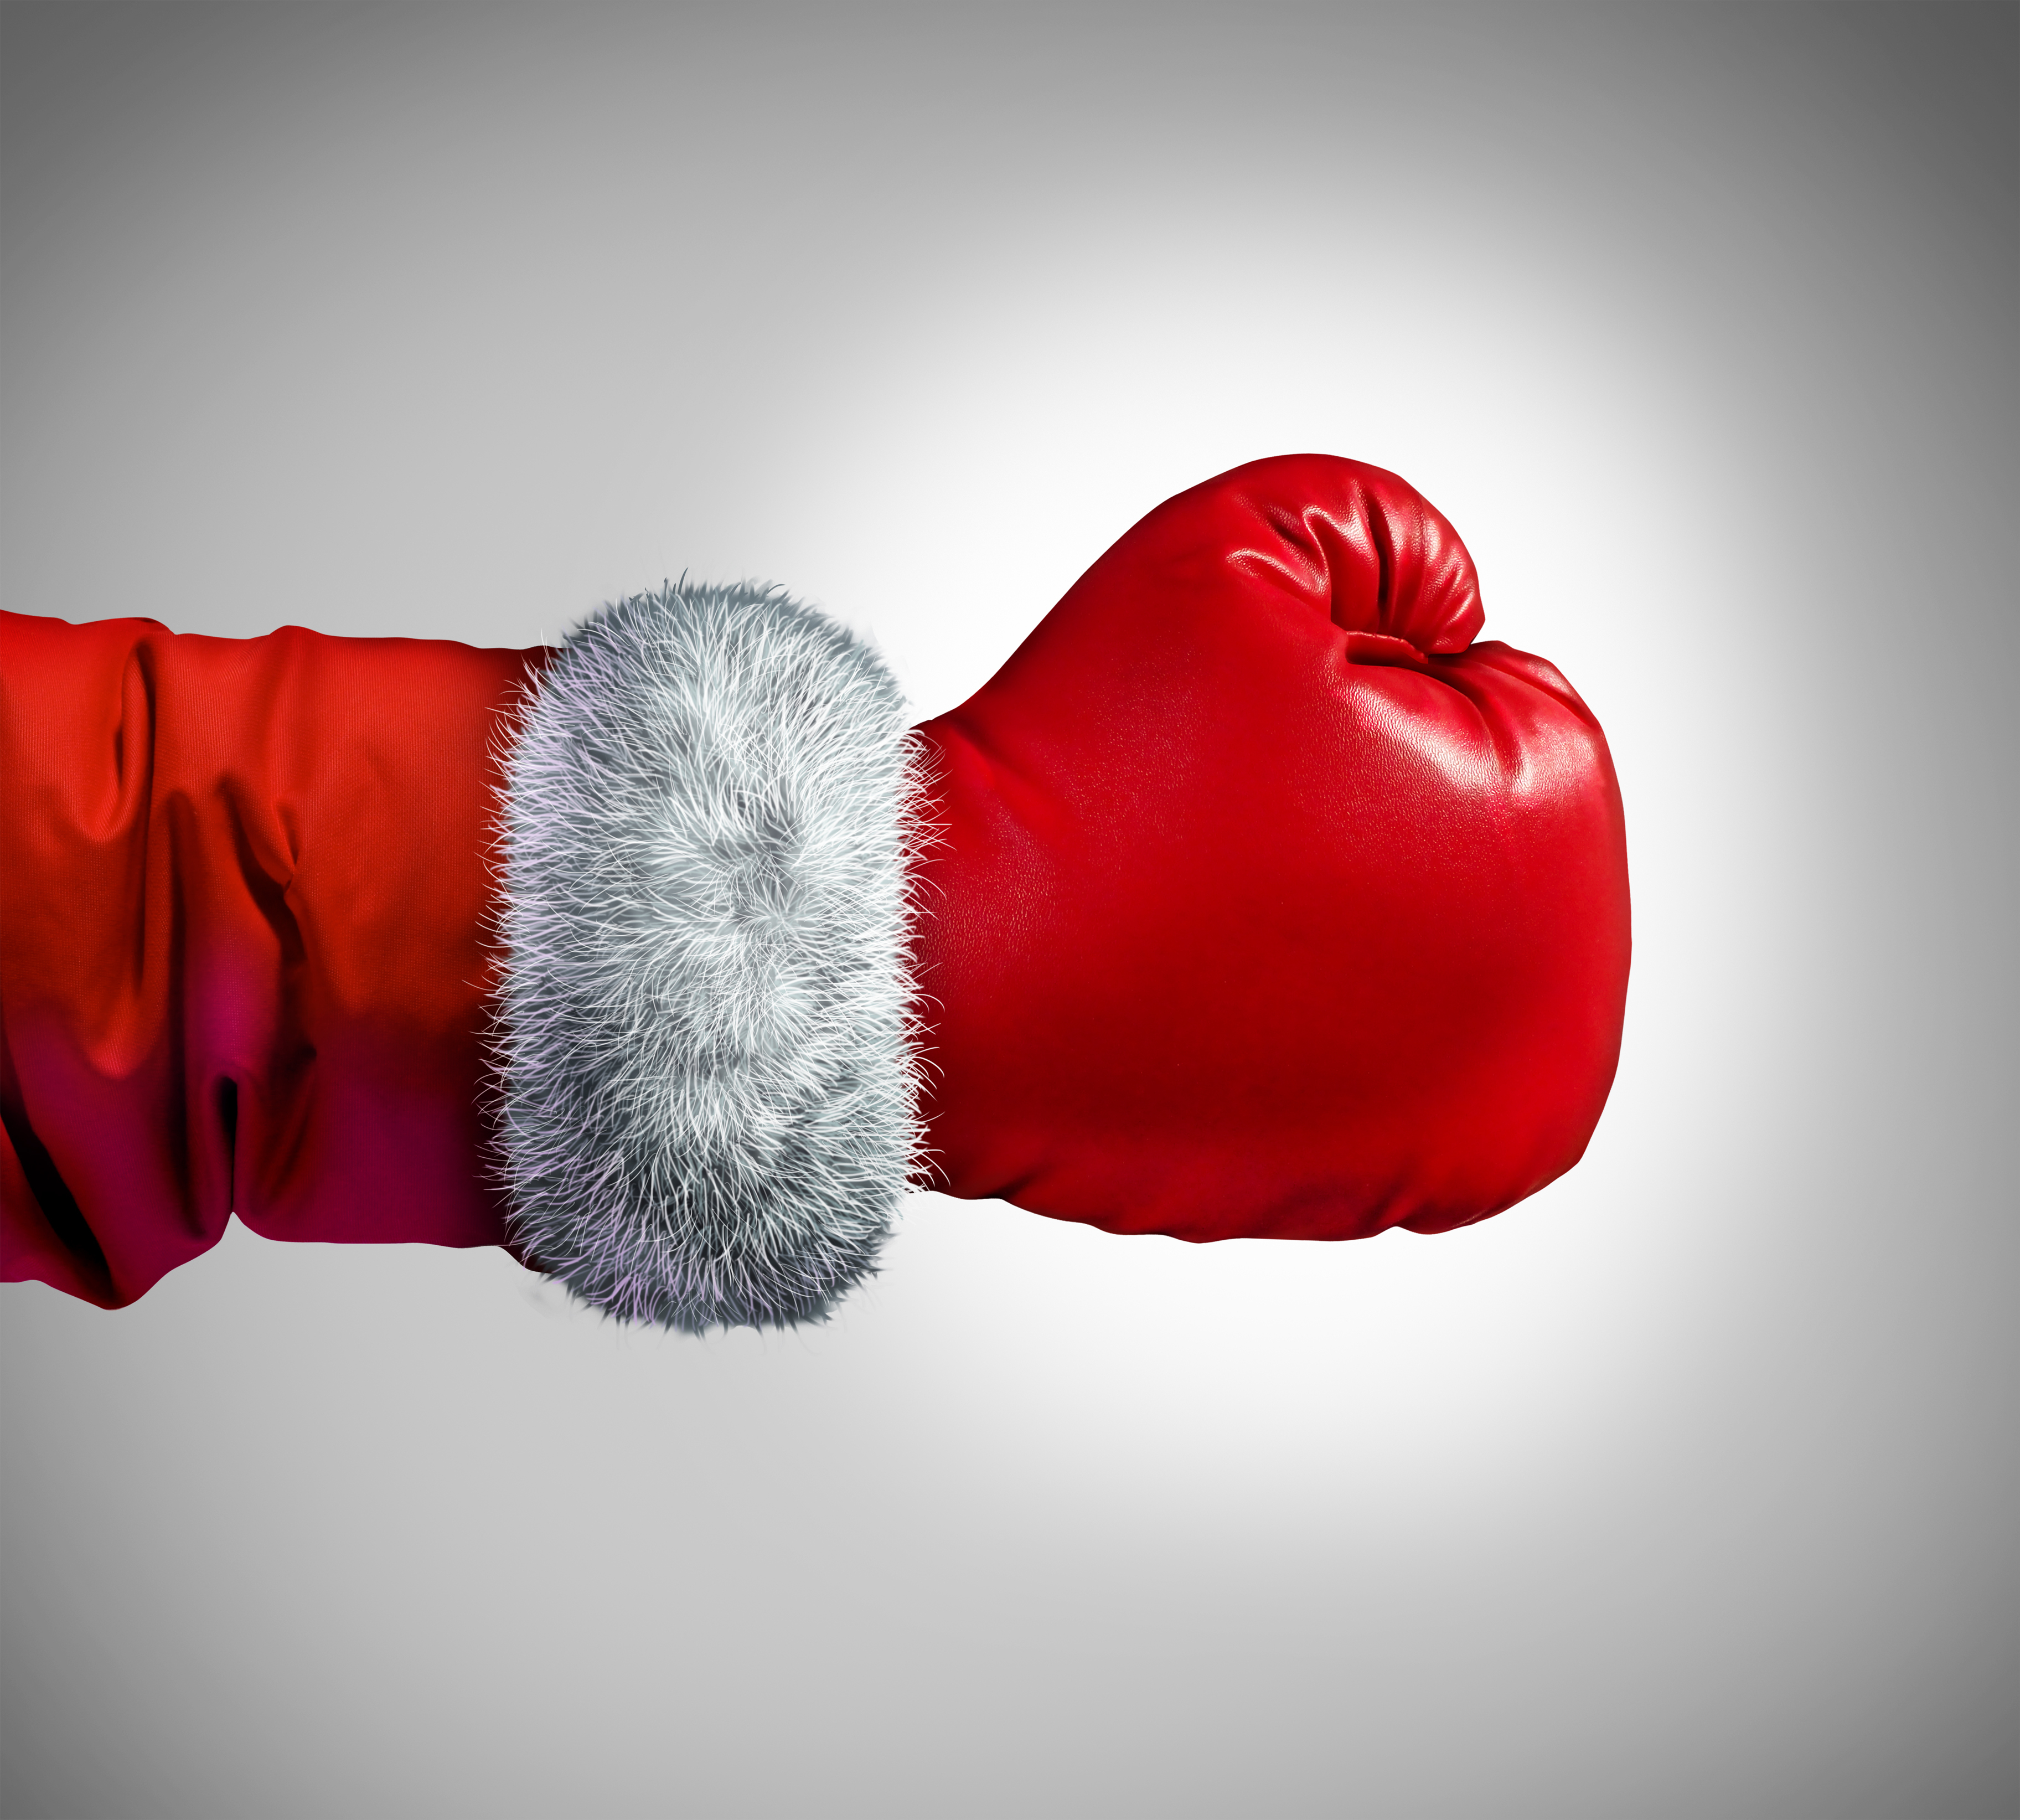 A boxing glove on the arm of someone wearing a Santa suit.